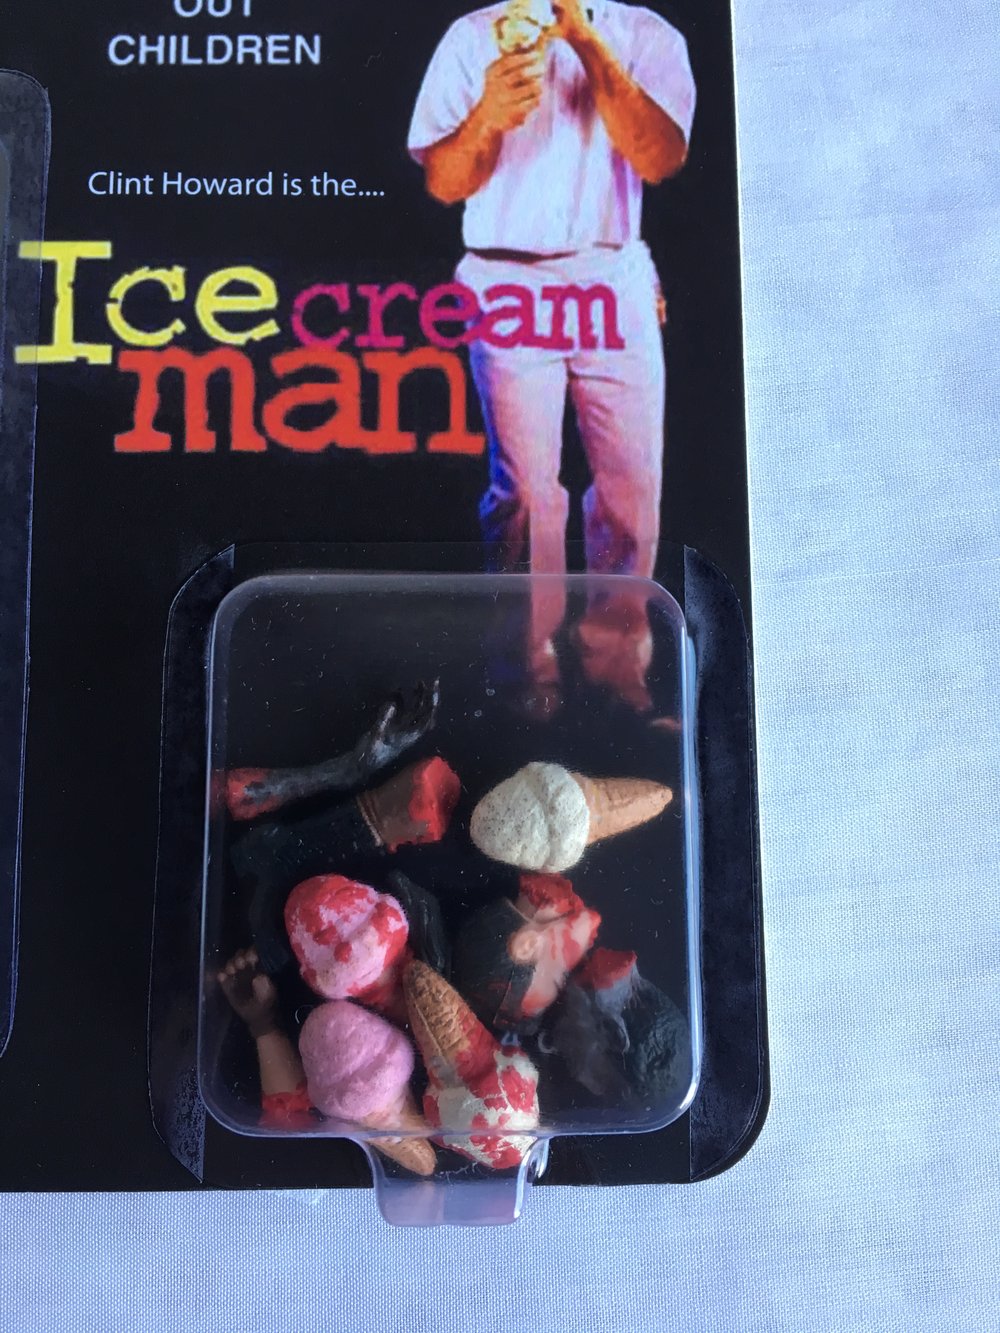 “You can’t run from the Ice Cream Man!”